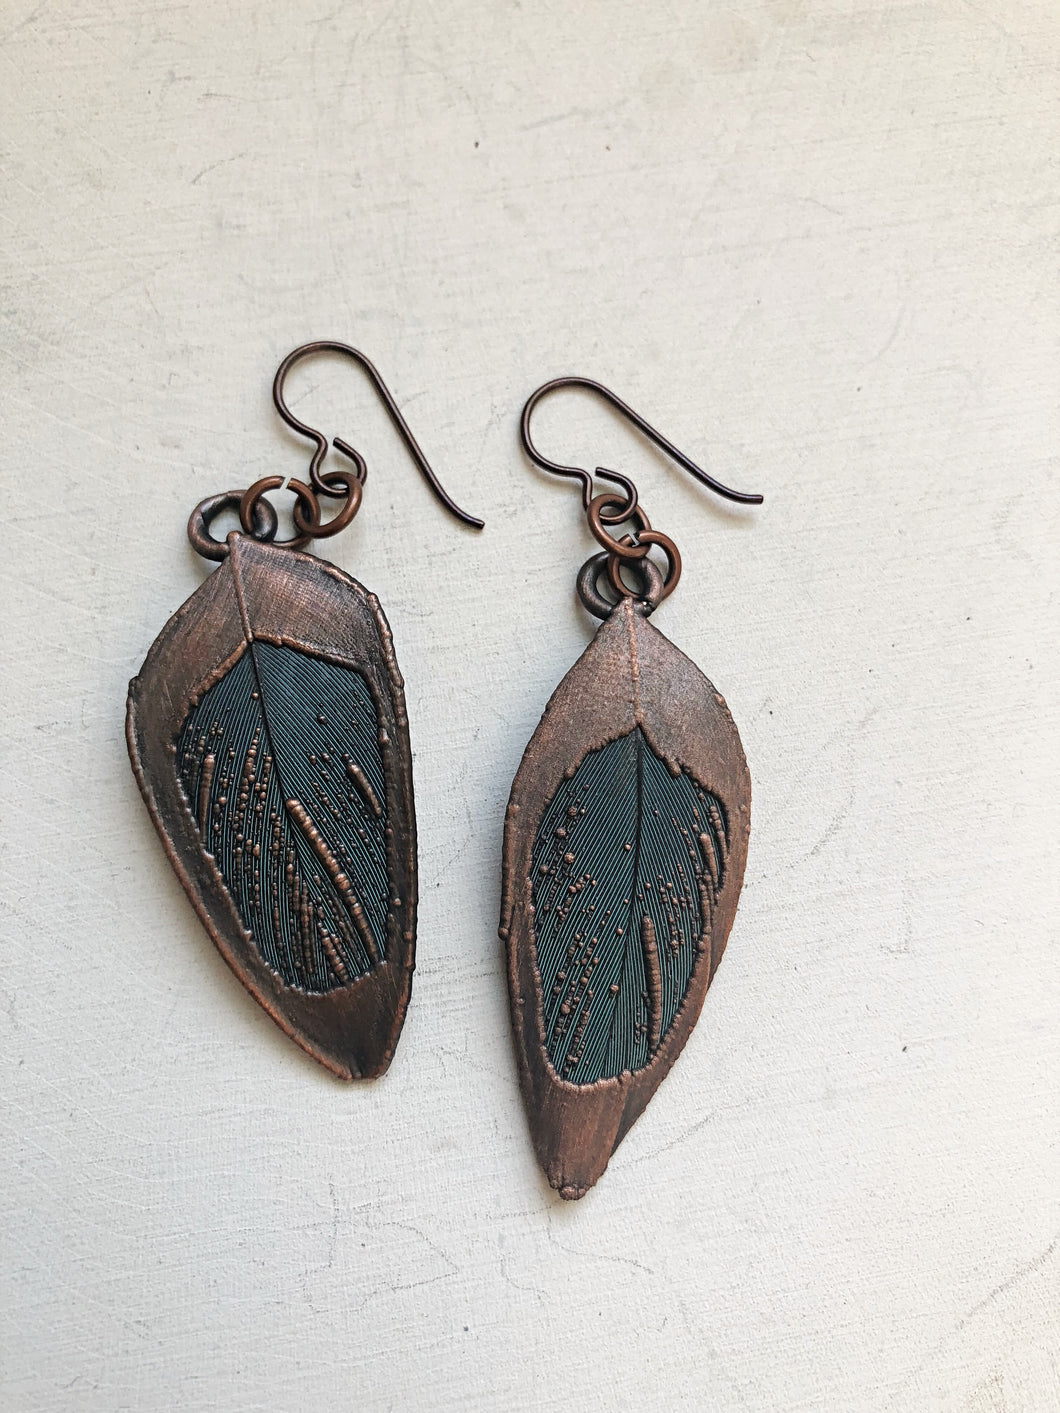 Electroformed Macaw Feather Earrings #1 - Ready to Ship (5/17 Update)